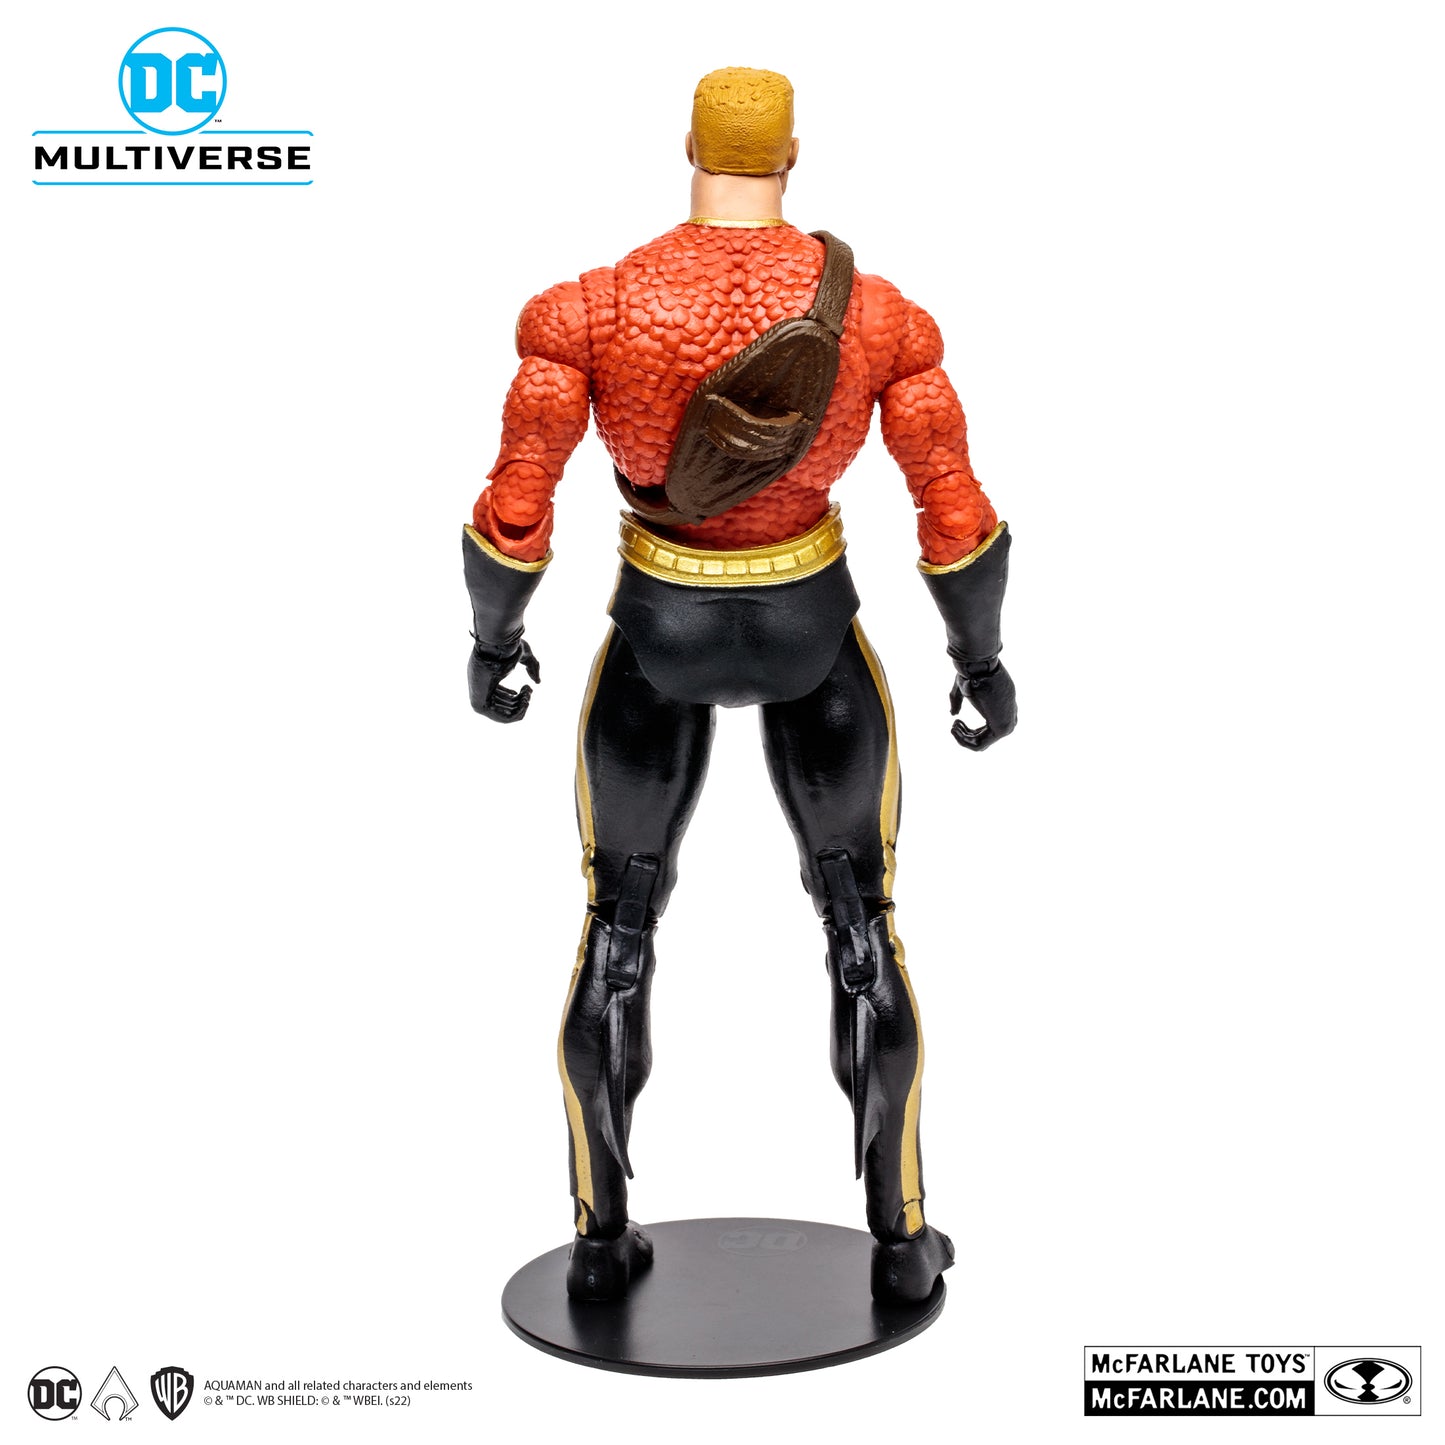 DC MULTIVERSE AQUAMAN FLASHPOINT (GOLD LABEL) 7 INCH ACTION FIGURE TOY